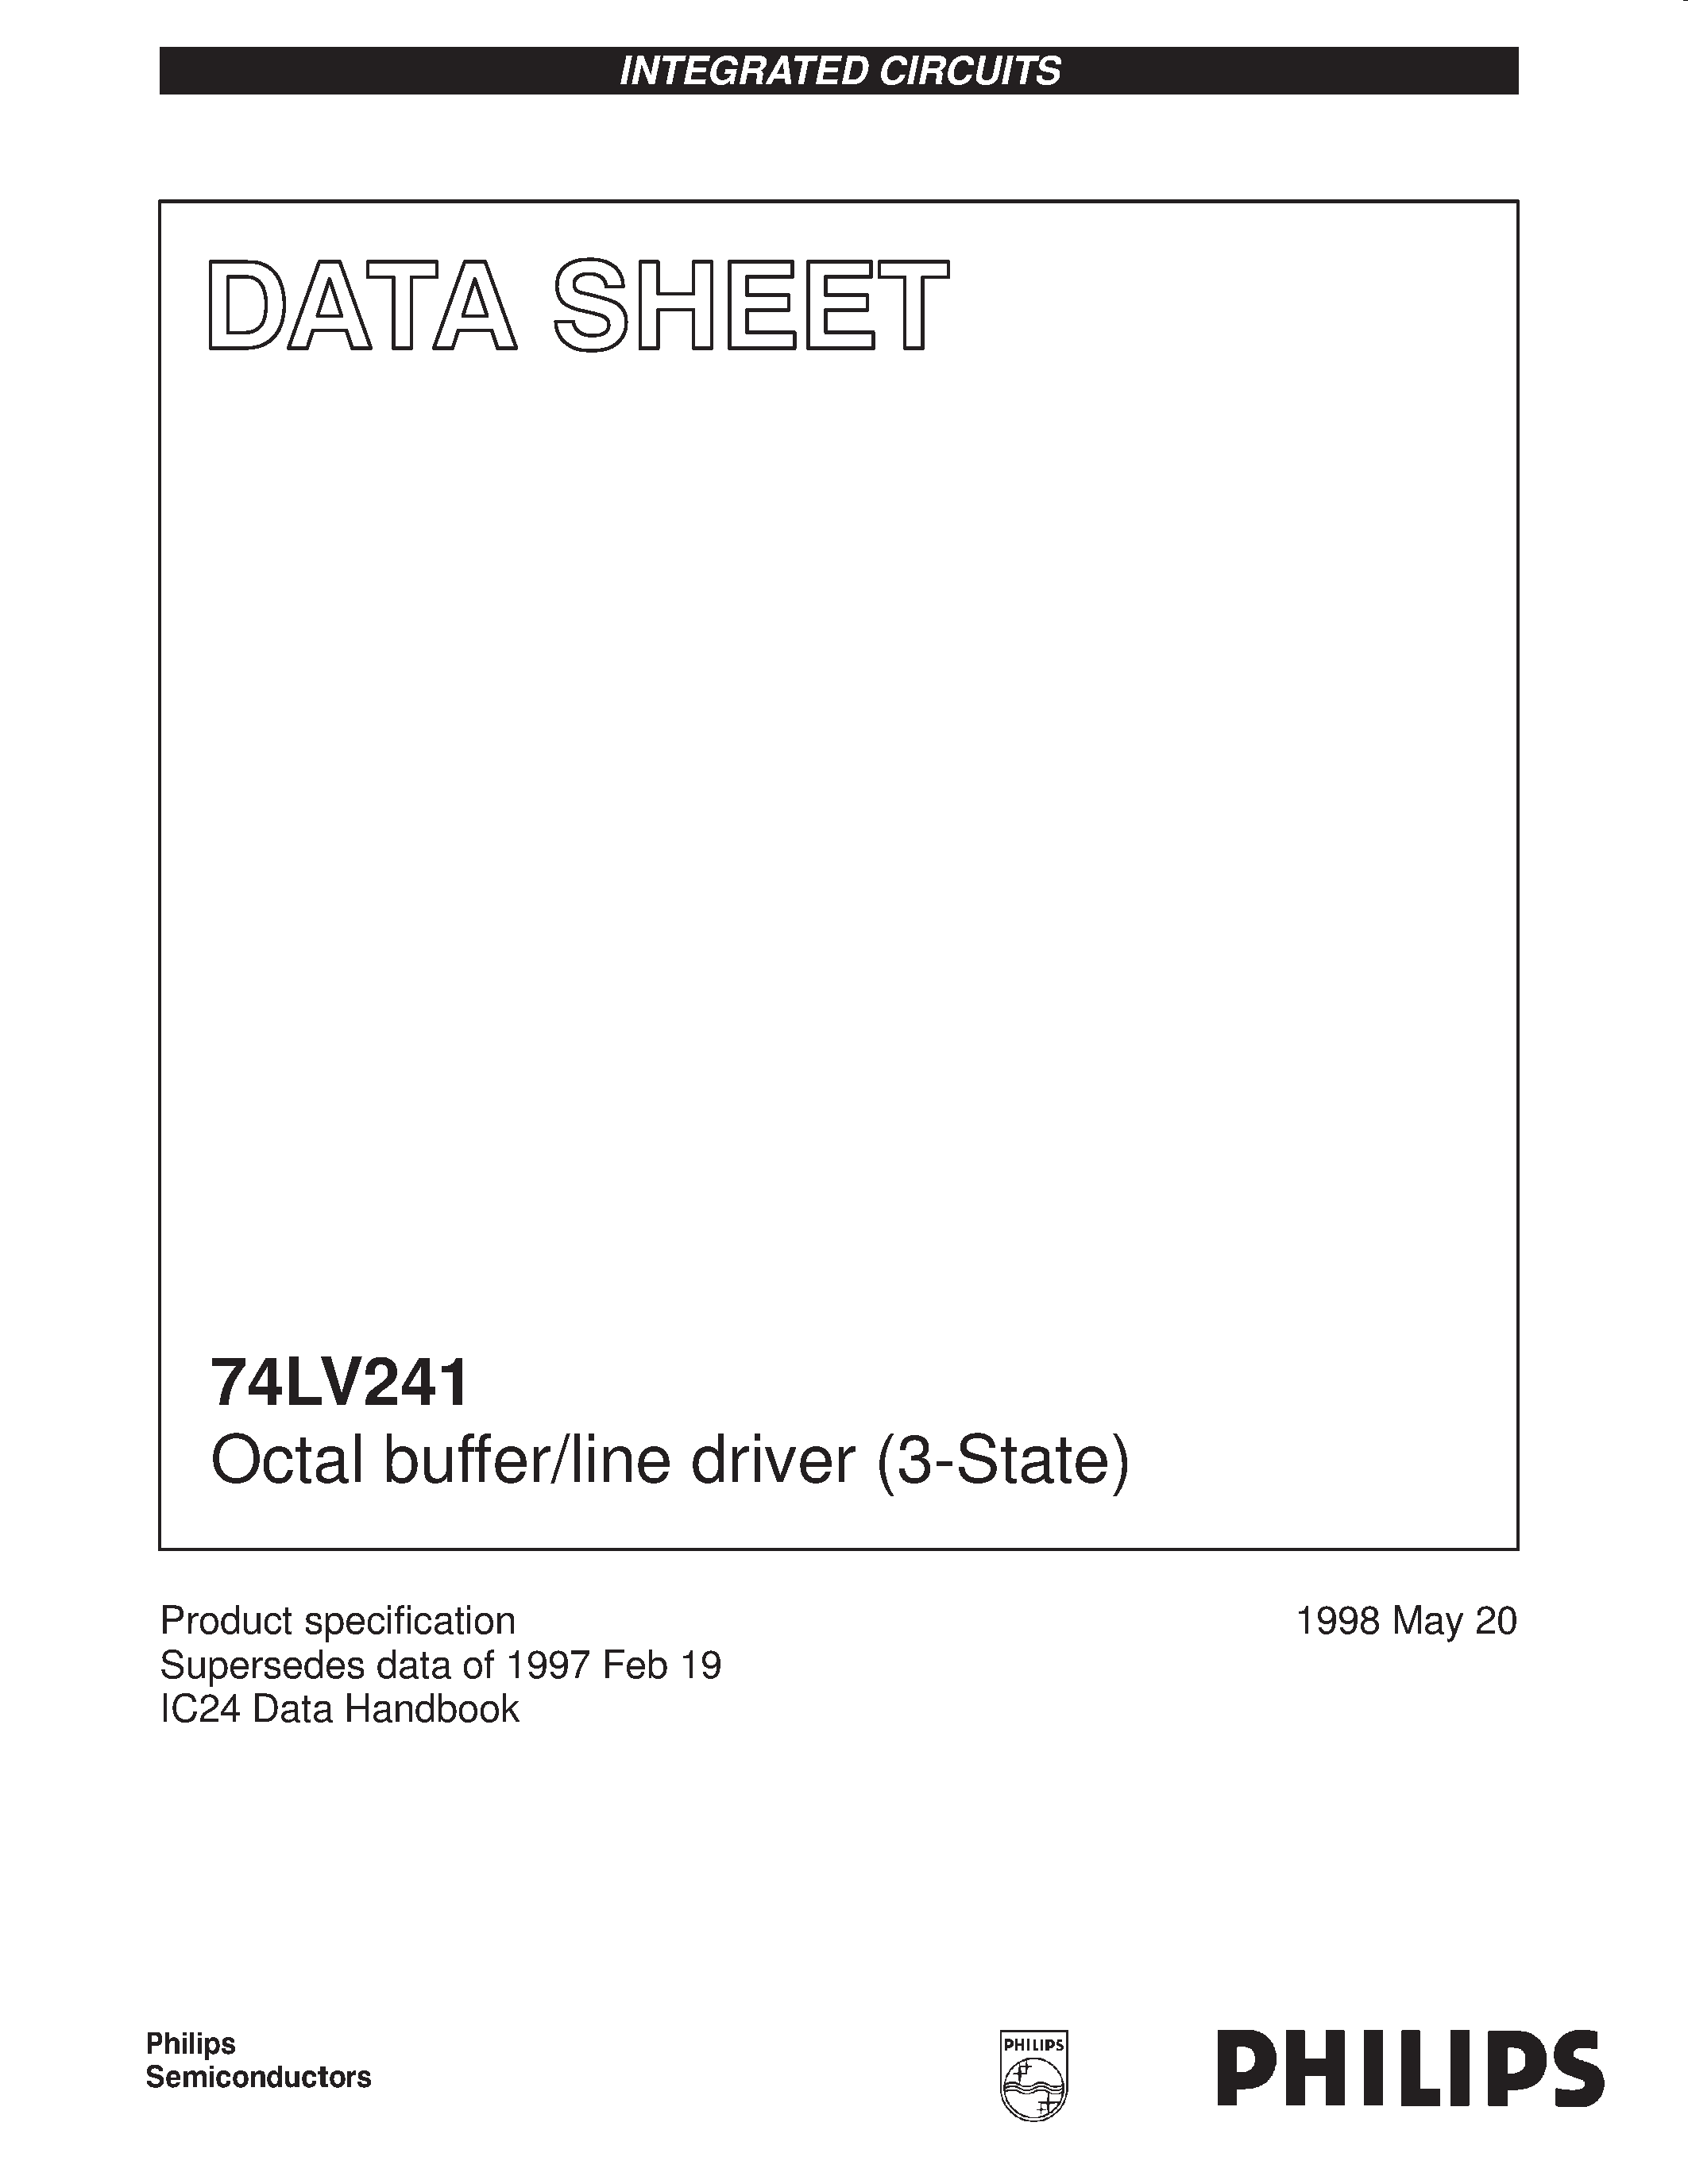 Datasheet 74LV241 - Octal buffer/line driver 3-State page 1